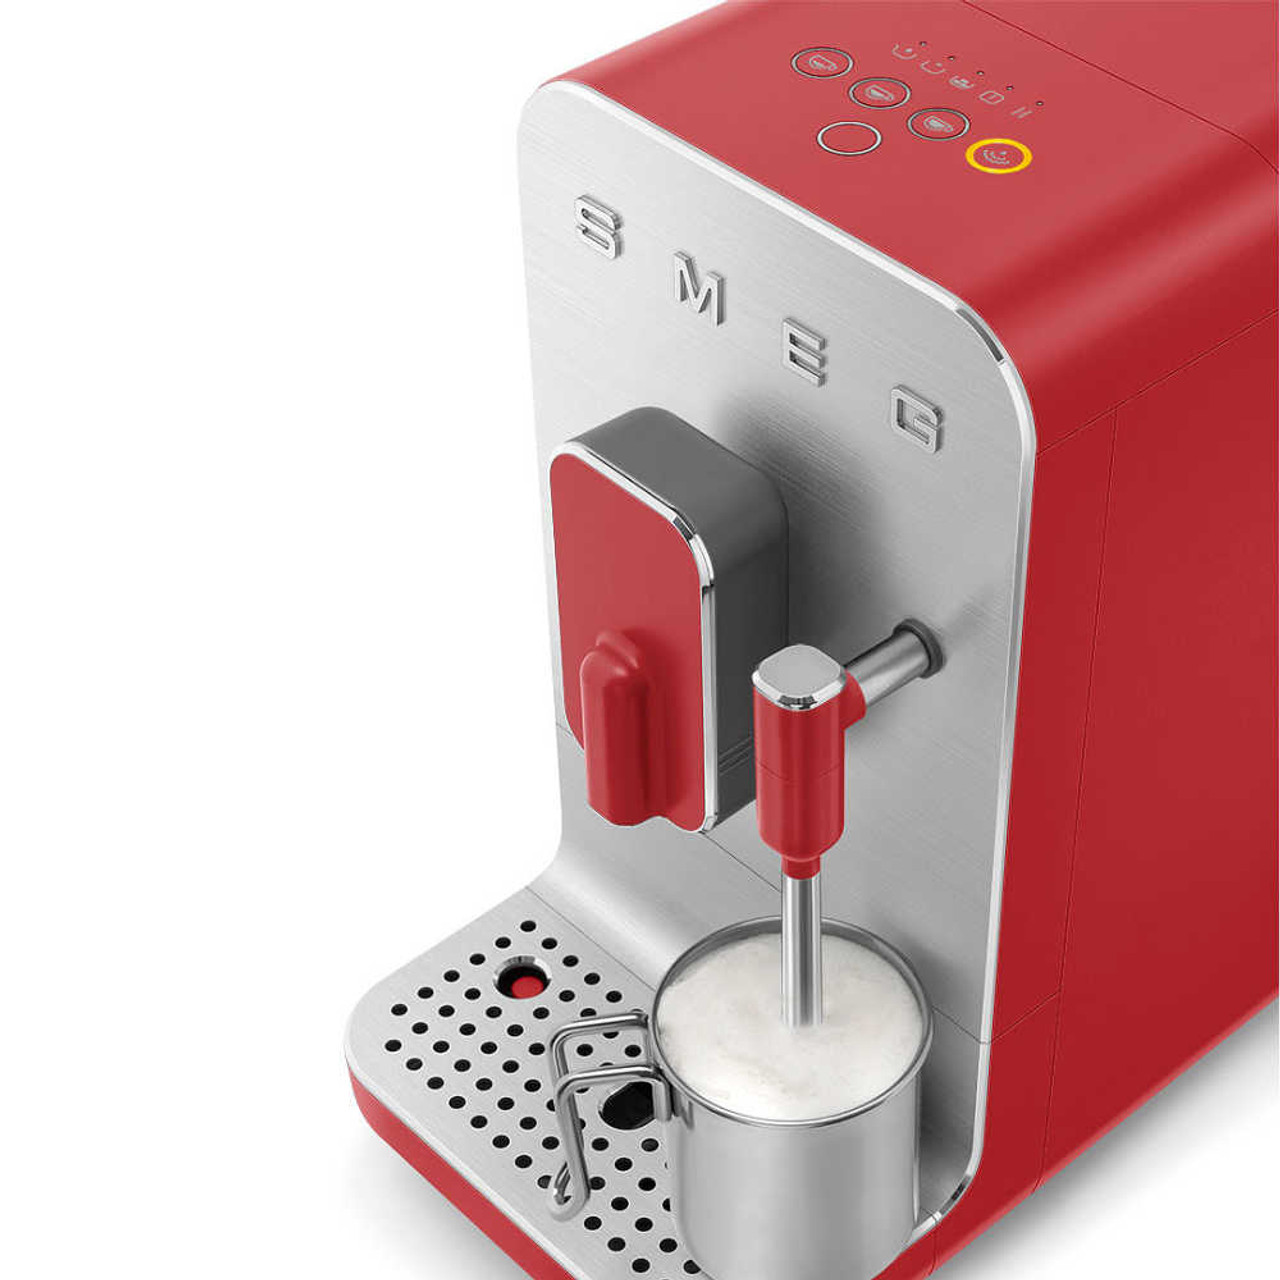 https://cdn11.bigcommerce.com/s-hccytny0od/images/stencil/1280x1280/products/4255/16146/smeg-espresso-coffee-machine-steamer-red-2__50185.1630249453.jpg?c=2?imbypass=on